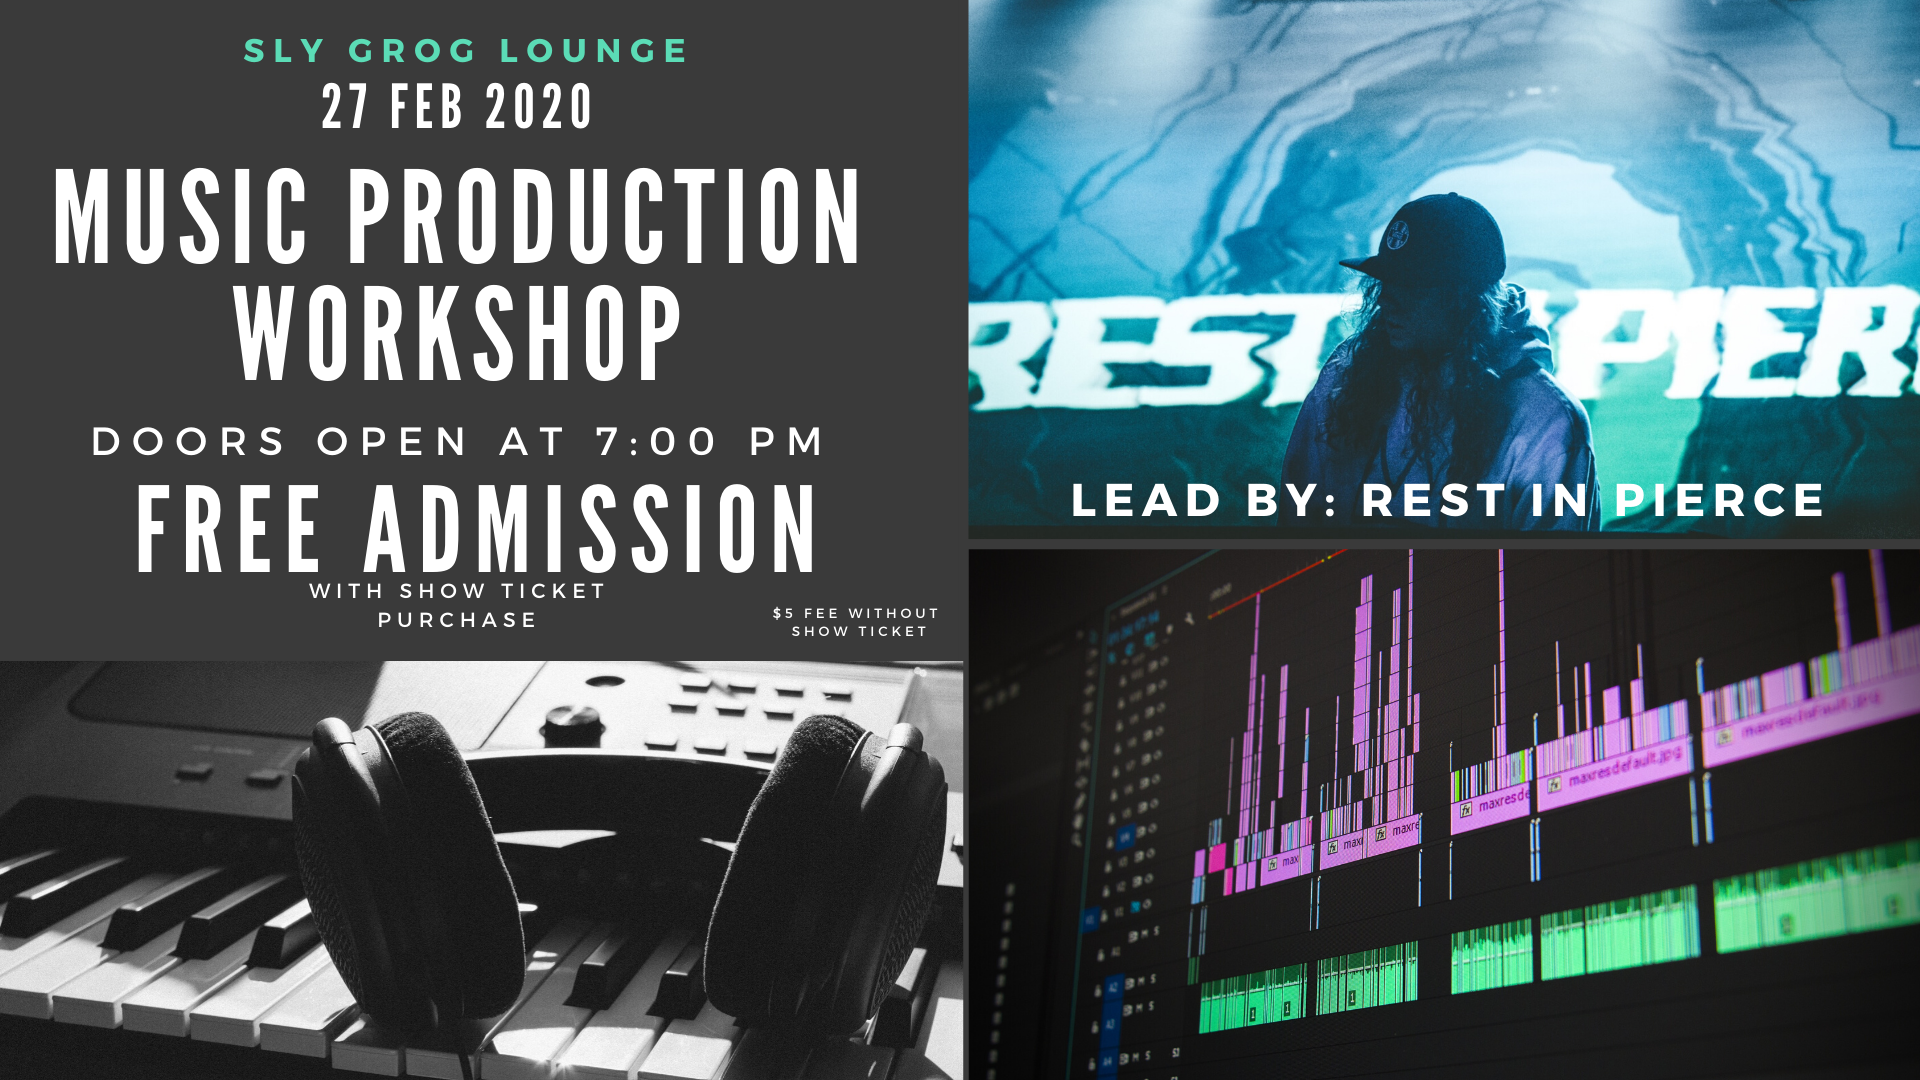 Music Production Workshop Led by: Rest In Pierce, Buncombe, North Carolina, United States